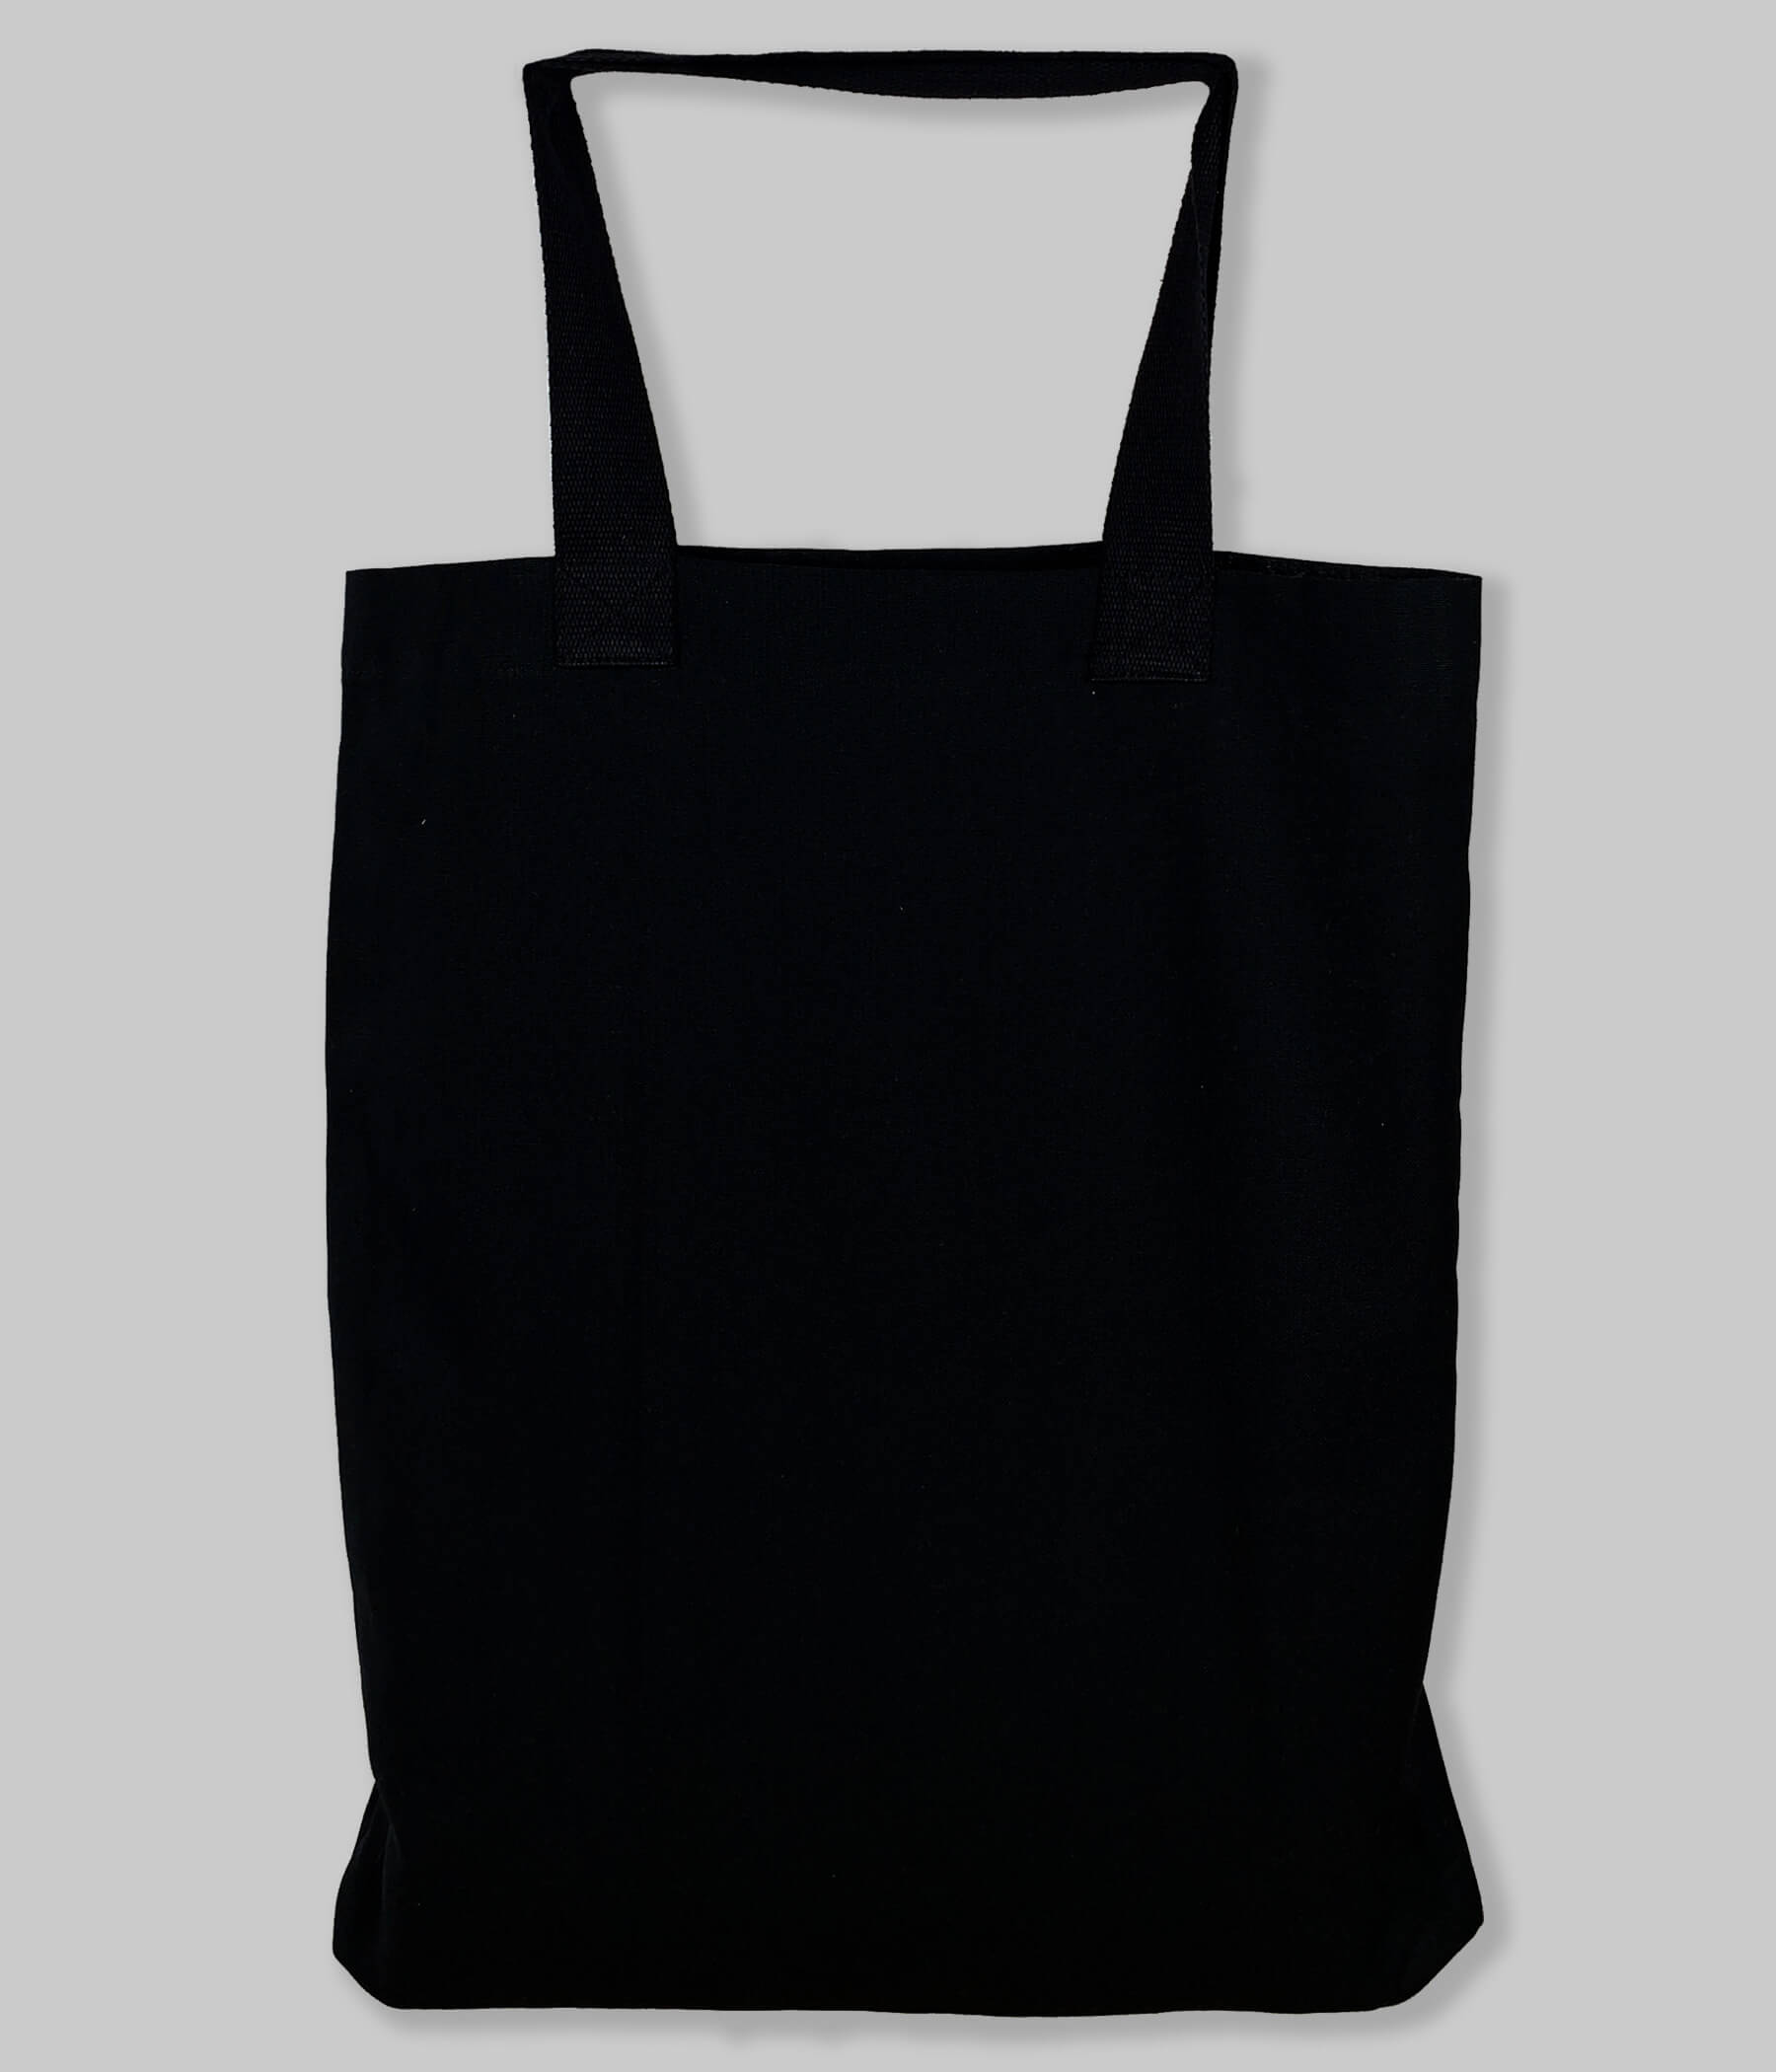 Blank black tote bags for screen printing - Pack of 5